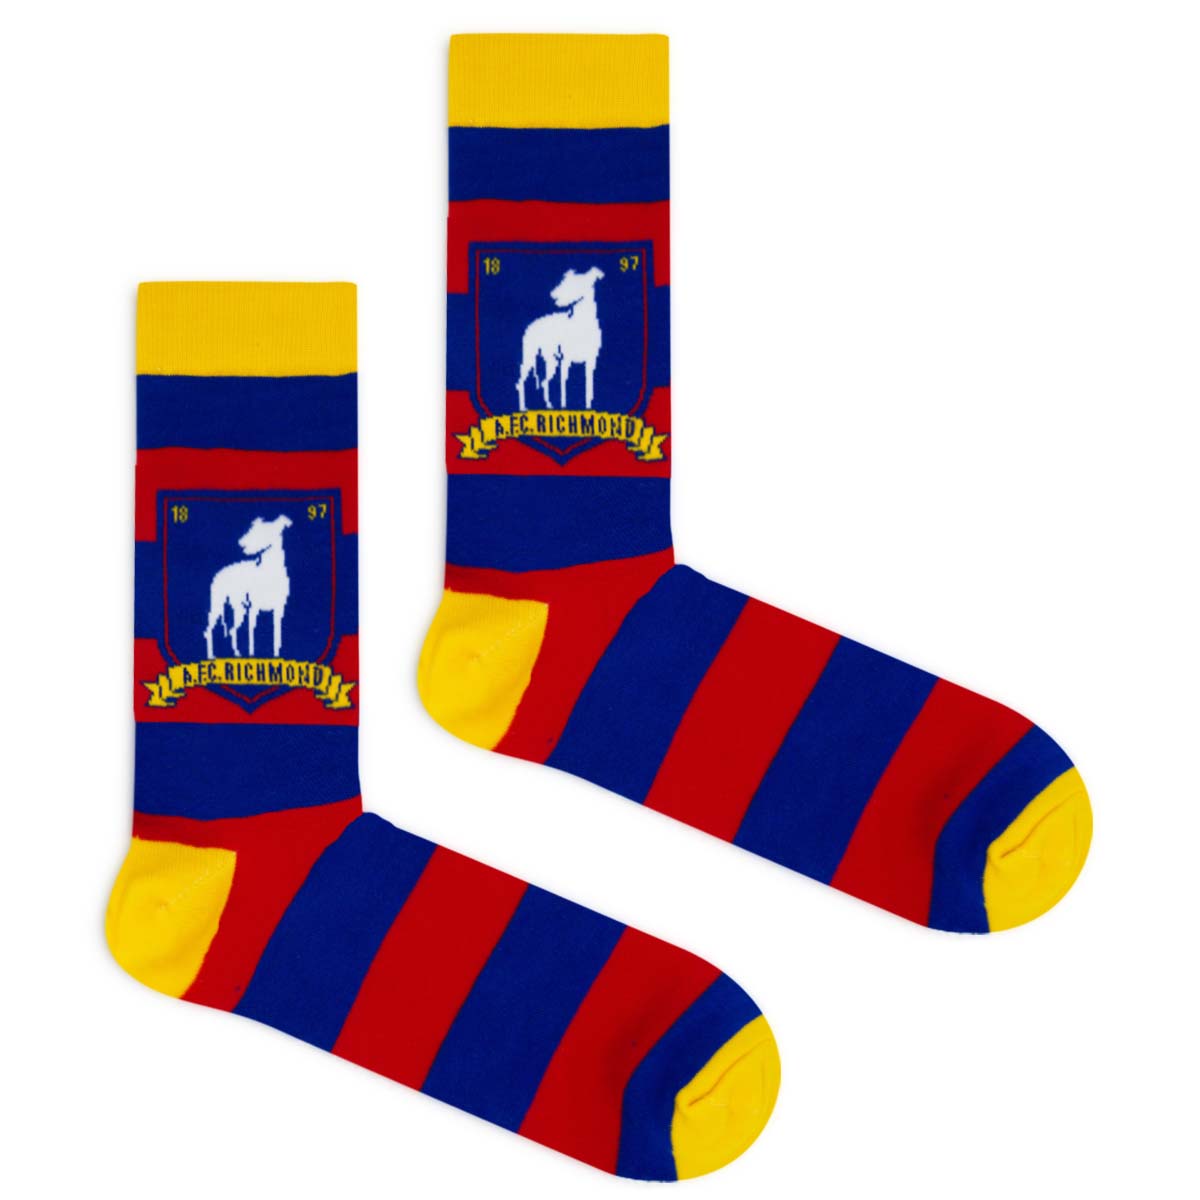 Exclusive Ted Lasso A.F.C. Richmond Knit Socks